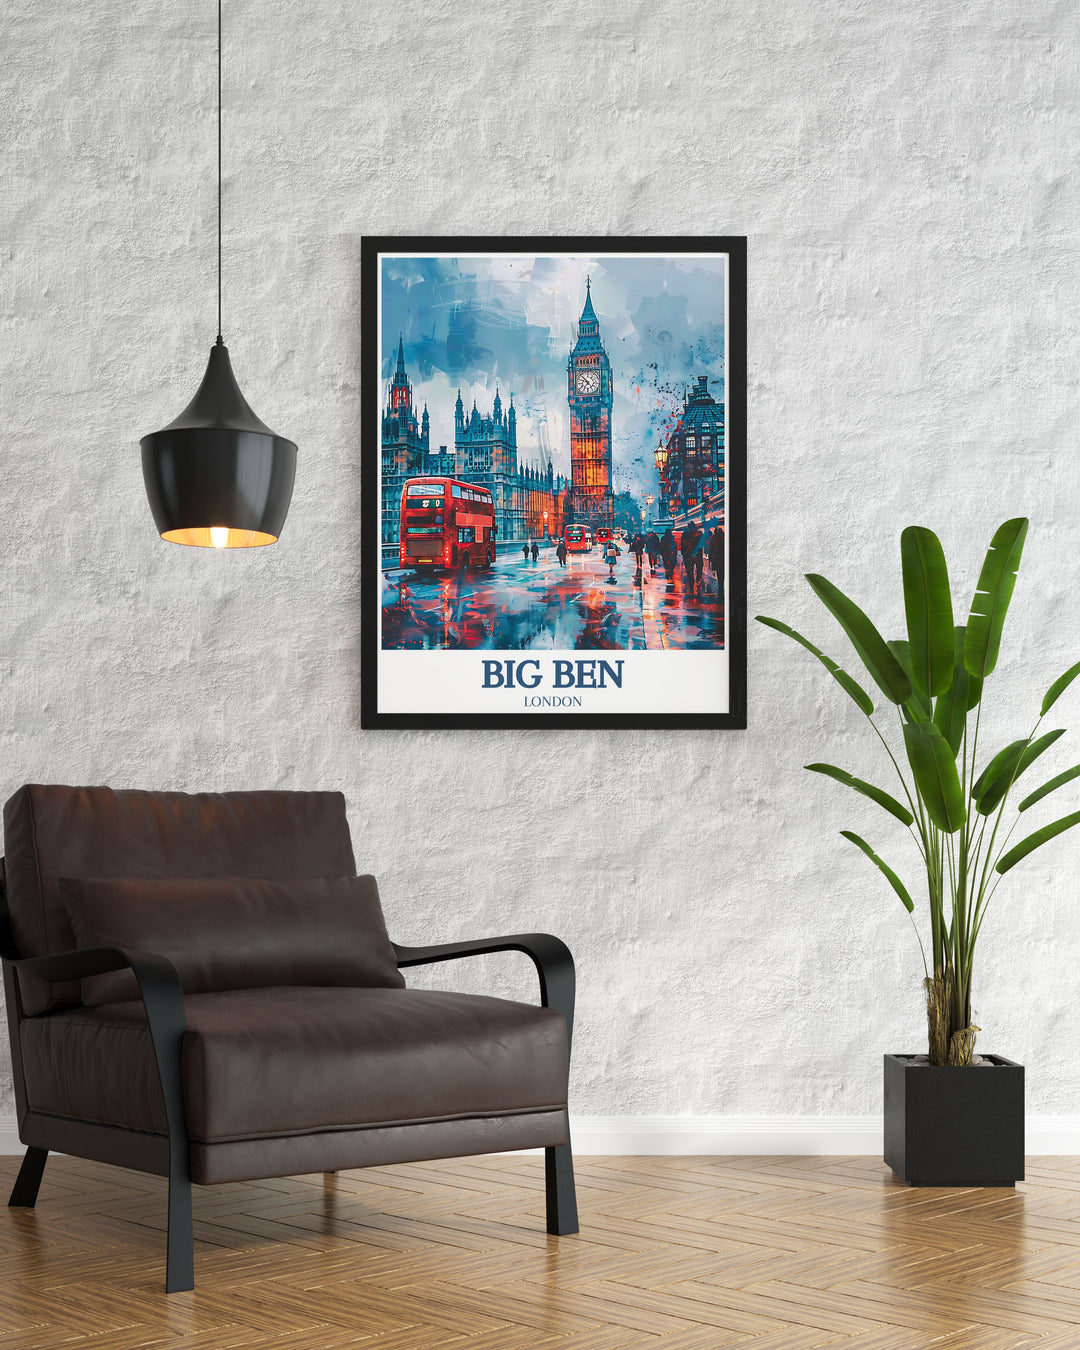 Beautiful Big Ben travel poster capturing the majestic Westminster Bridge and the stunning views of the River Thames, perfect for enhancing your home or office with Londons iconic landmarks.